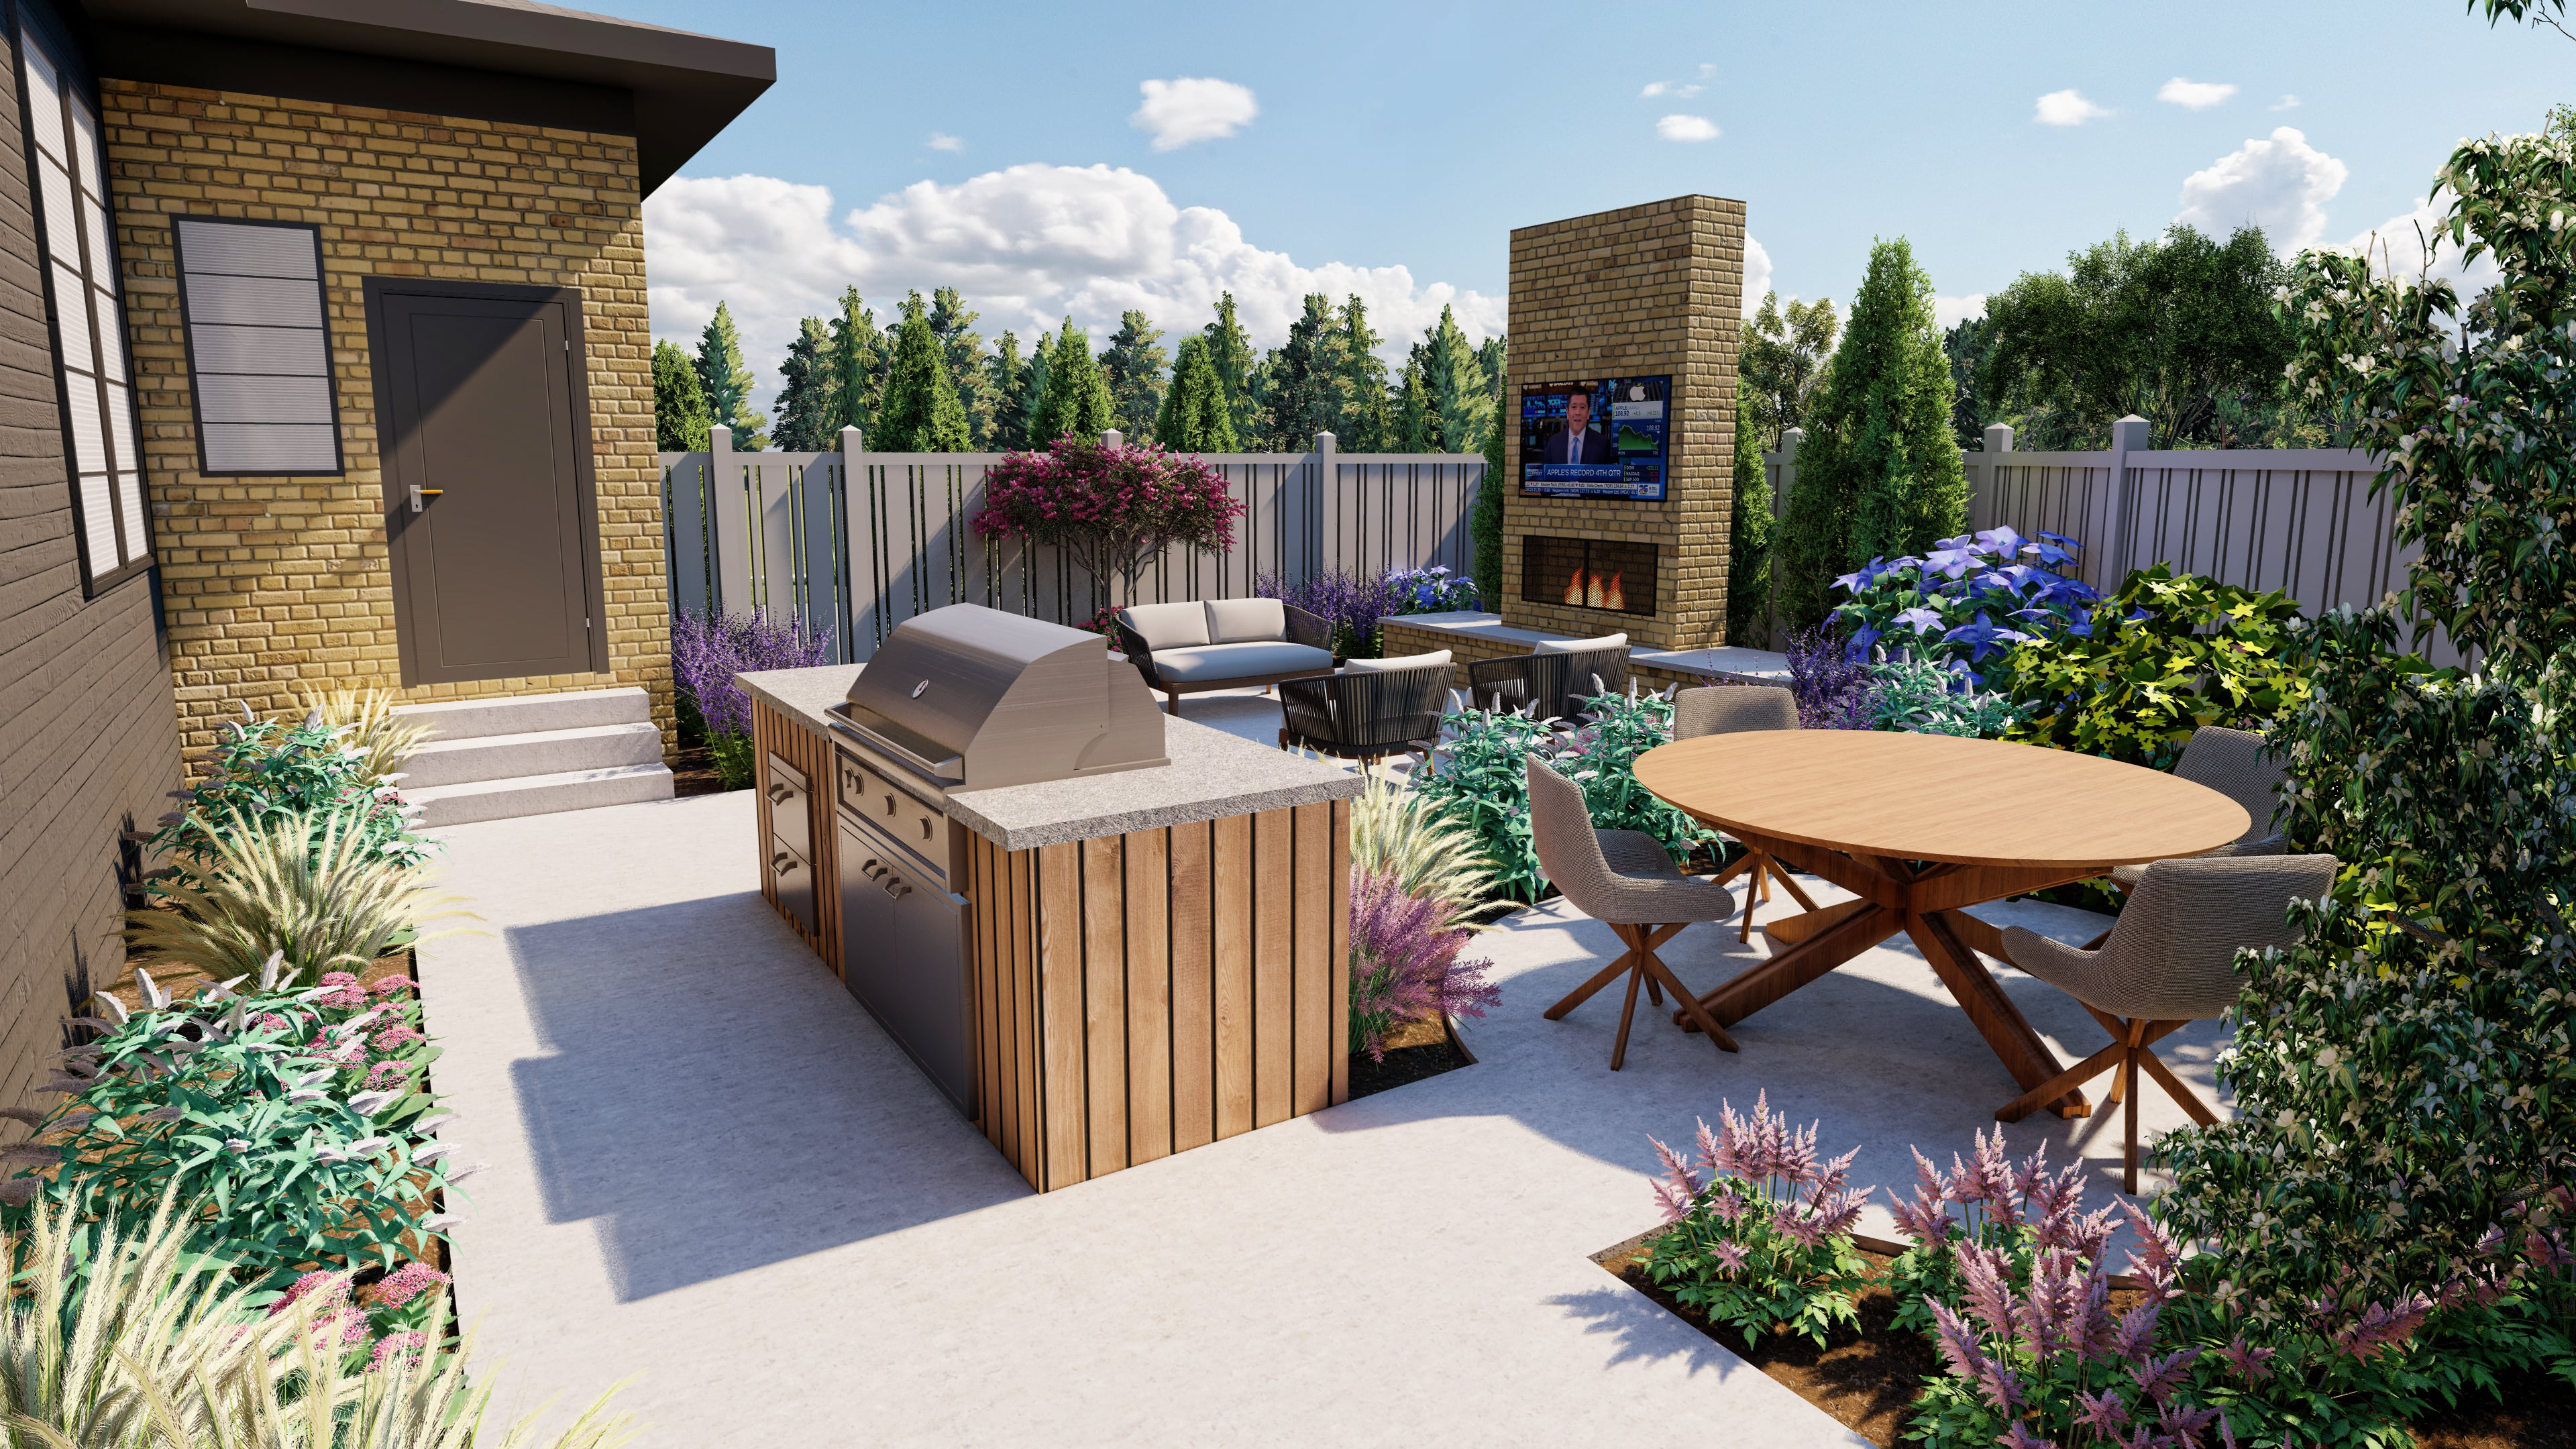 a Tilly backyard with an outdoor kitchen, fridge with cold drinks, outdoor TV and fire place over a paver patio